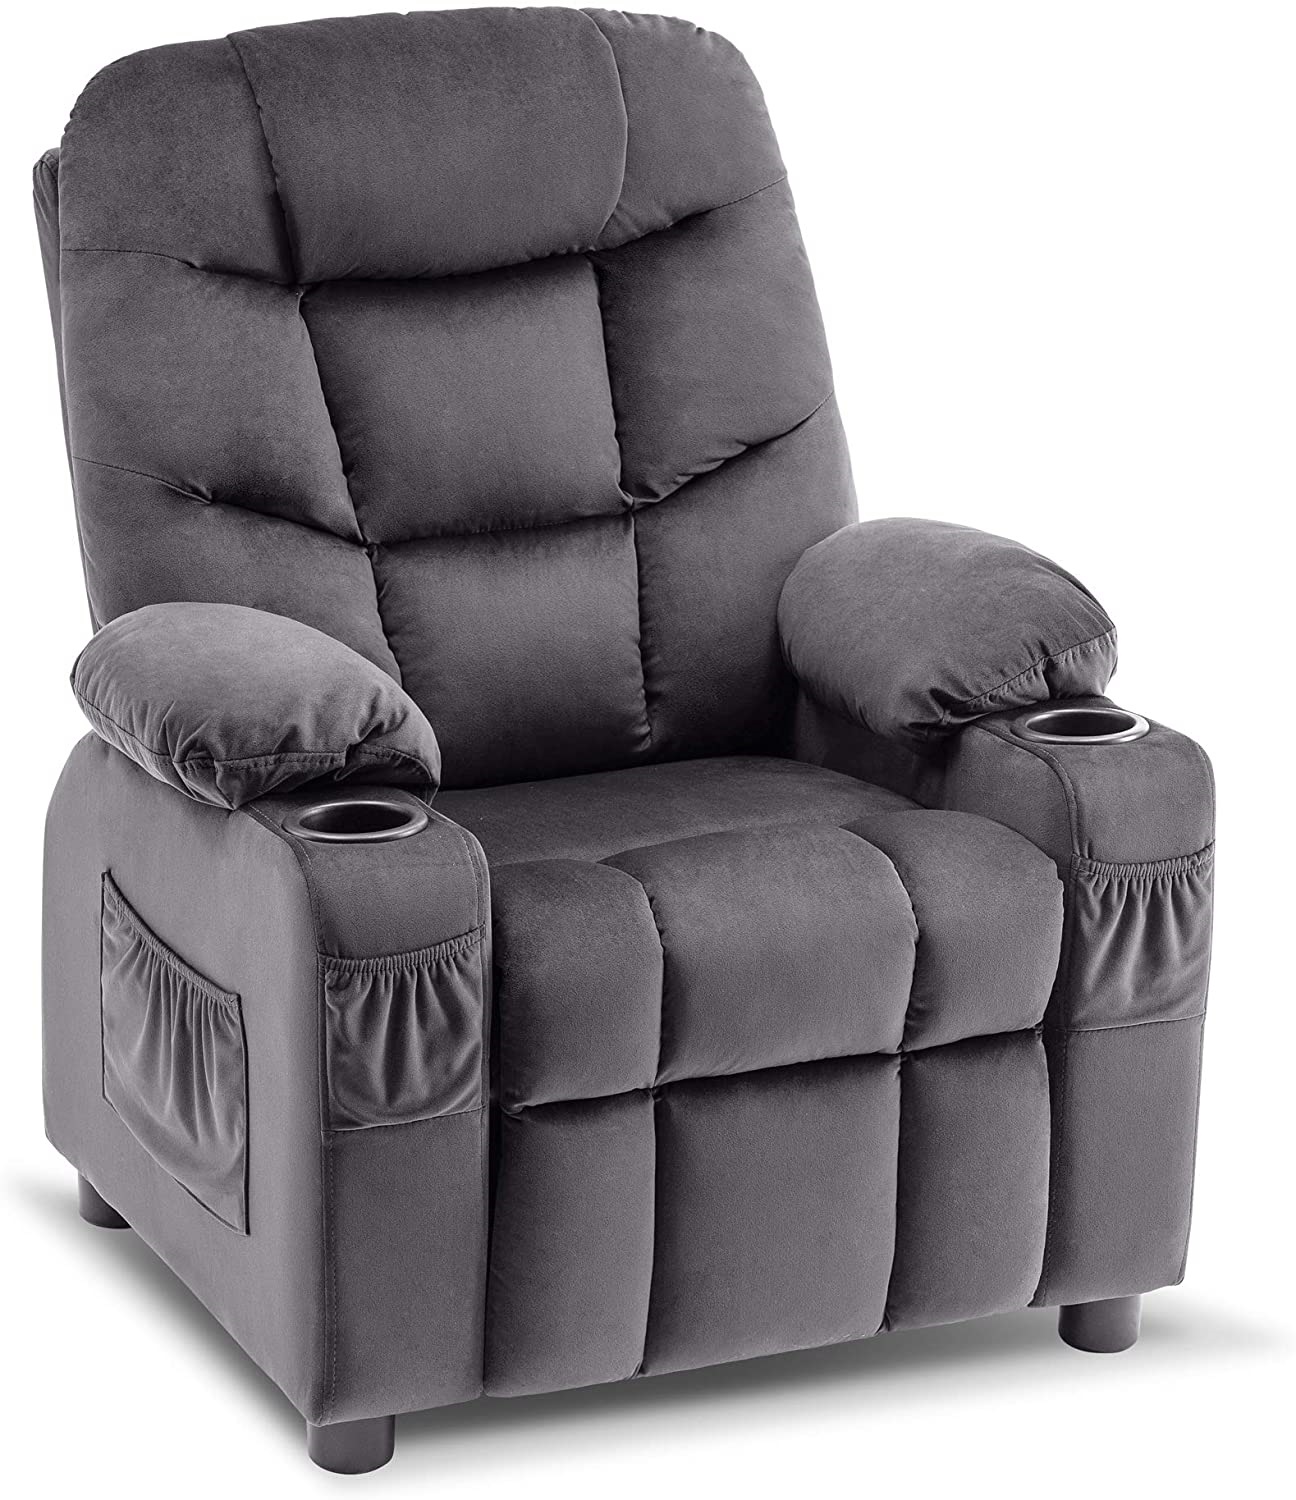 Mcombo Big Kids Recliner Chair with Cup Holders for Boys and Girls Room, 2 Side Pockets